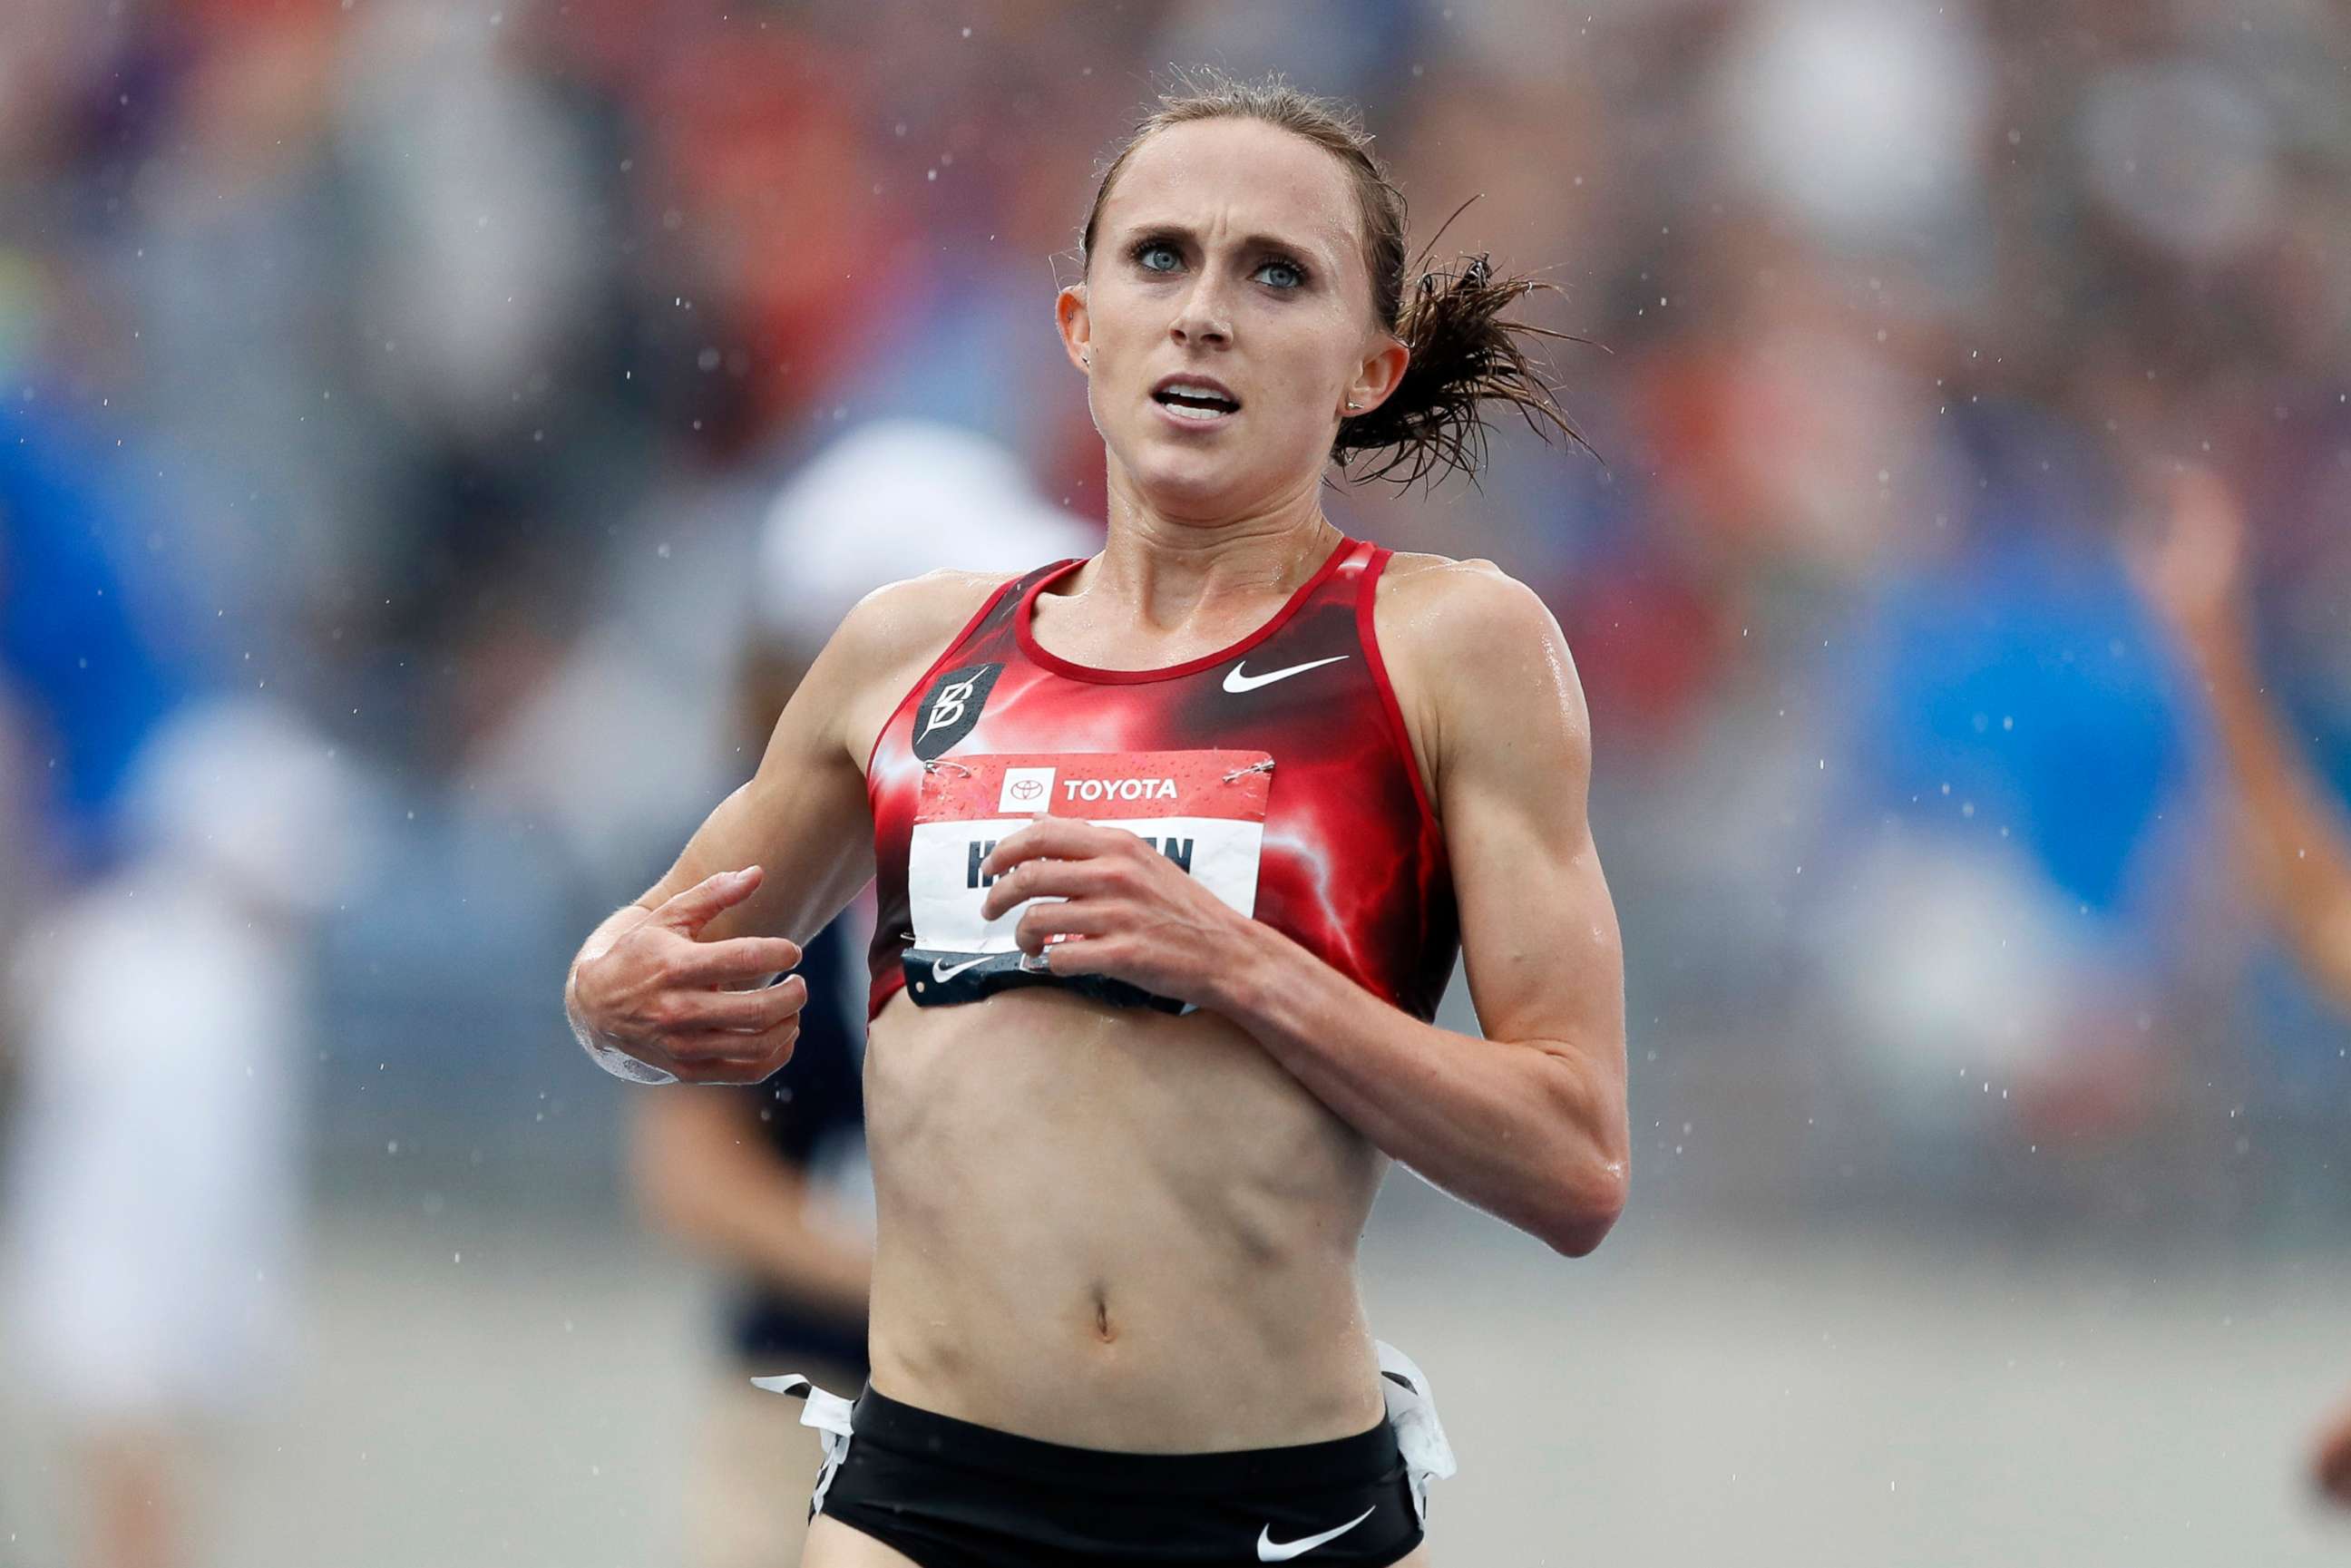 PHOTO: In this July 28, 2019 file photo, Shelby Houlihan crosses the finish line as she wins the women's 5,000-meter run at the U.S. Championships athletics meet, in Des Moines, Iowa.